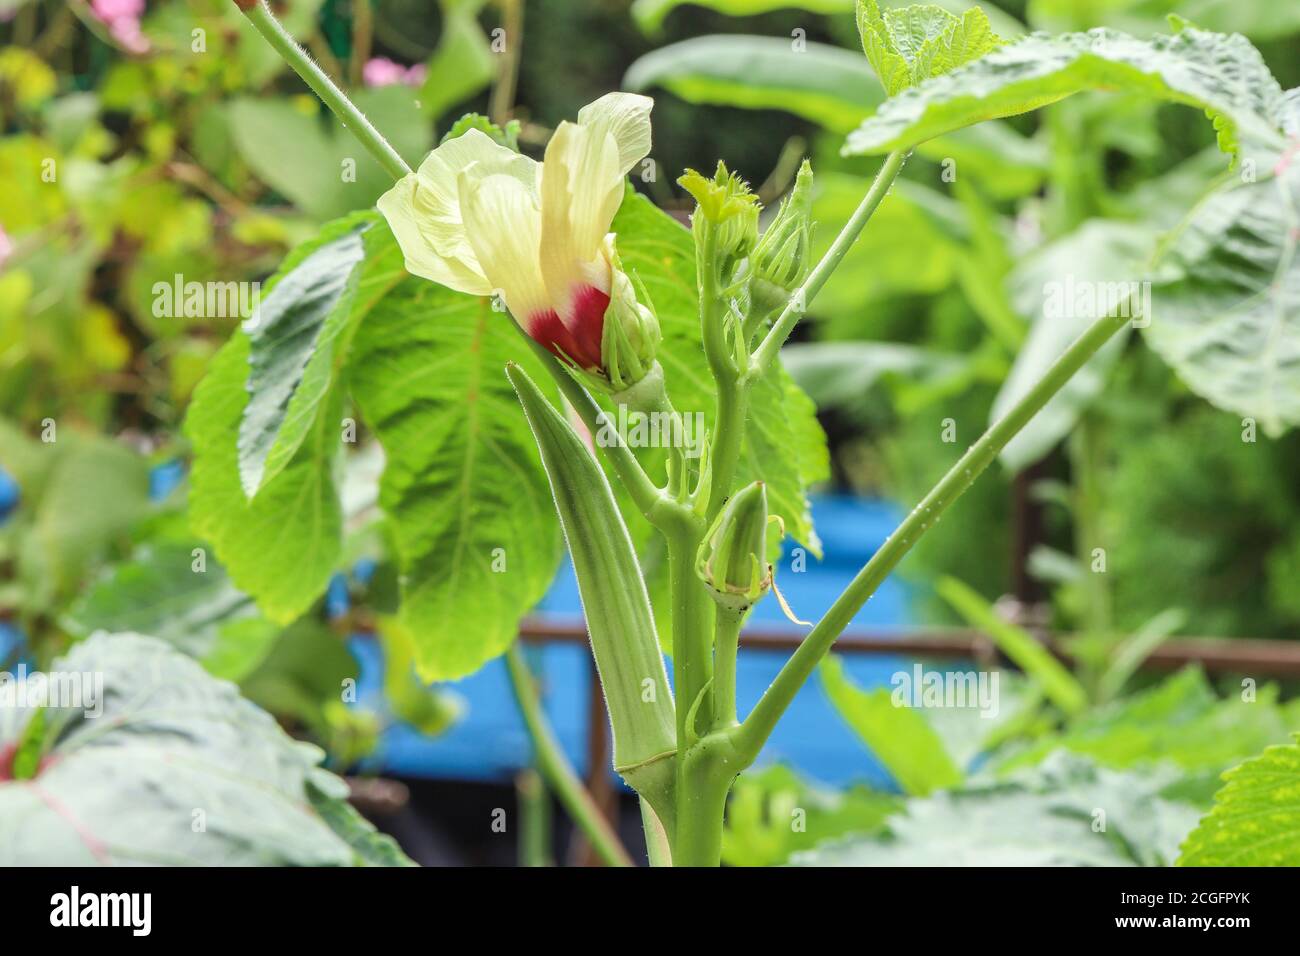 Ladies' finger or okra flower and new pods on an okra plant Stock Photo